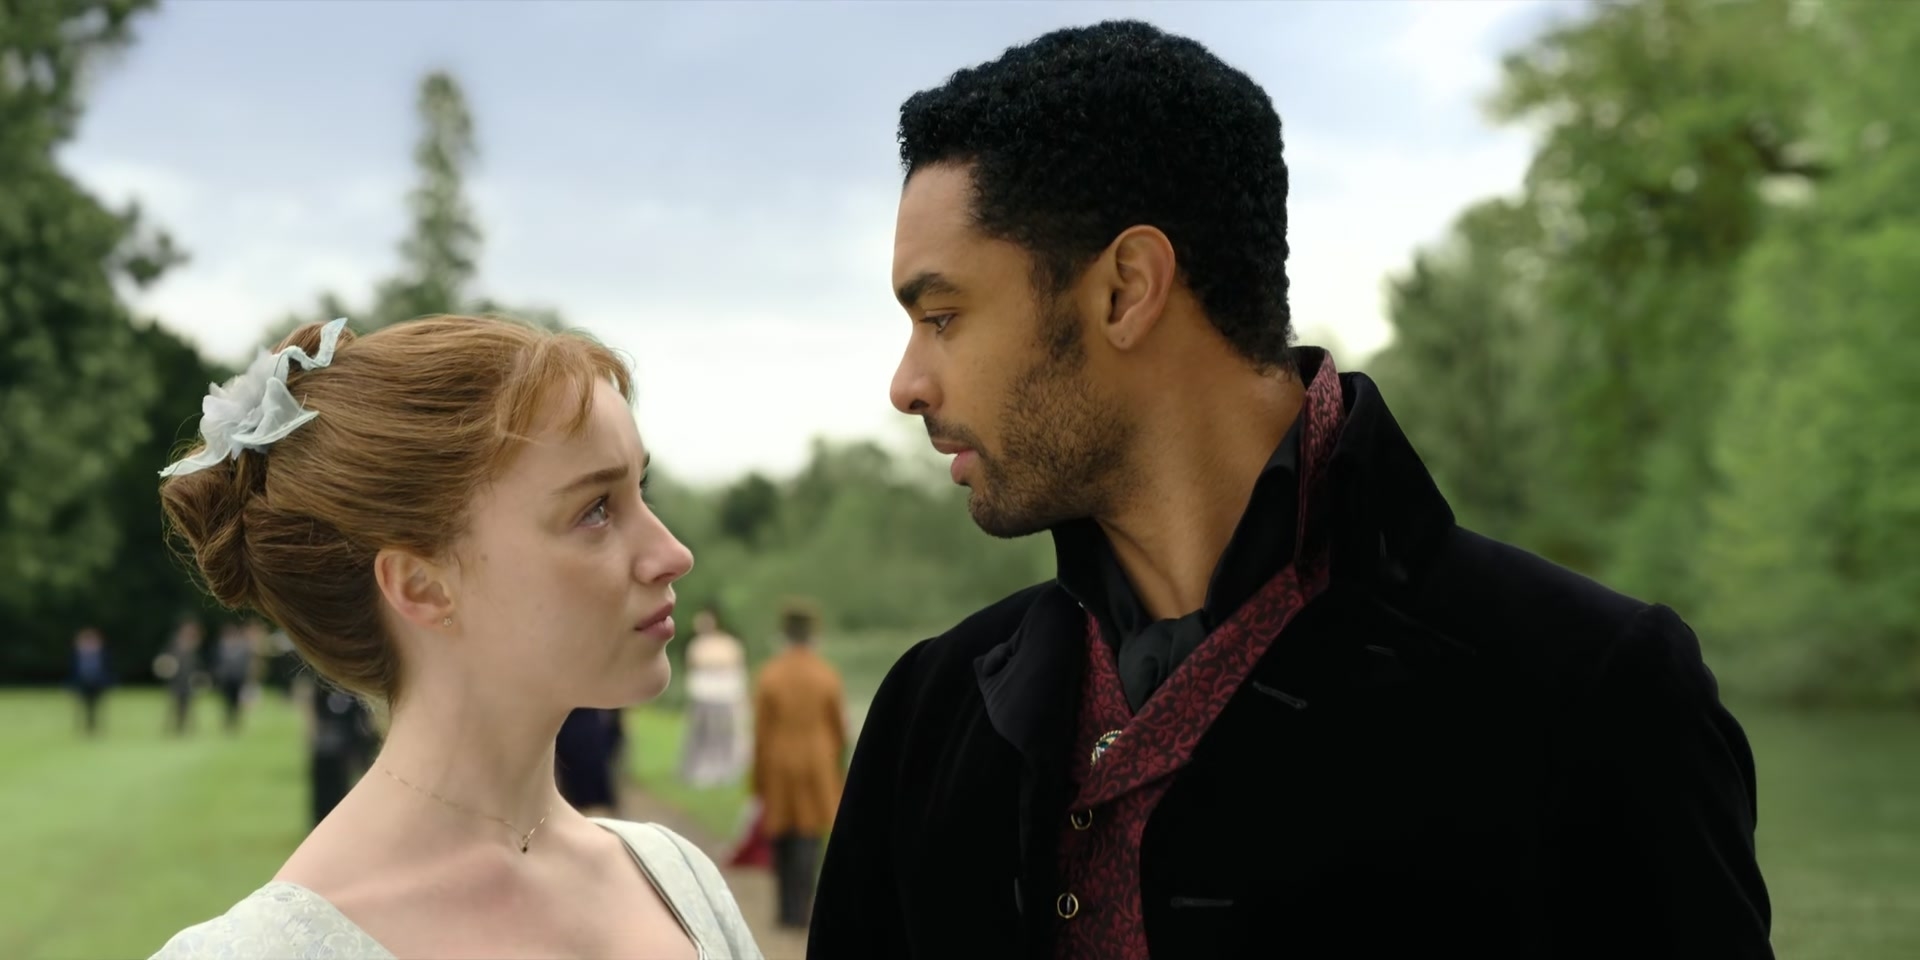 Woman and man in period clothing gaze at each other with a park scene behind them